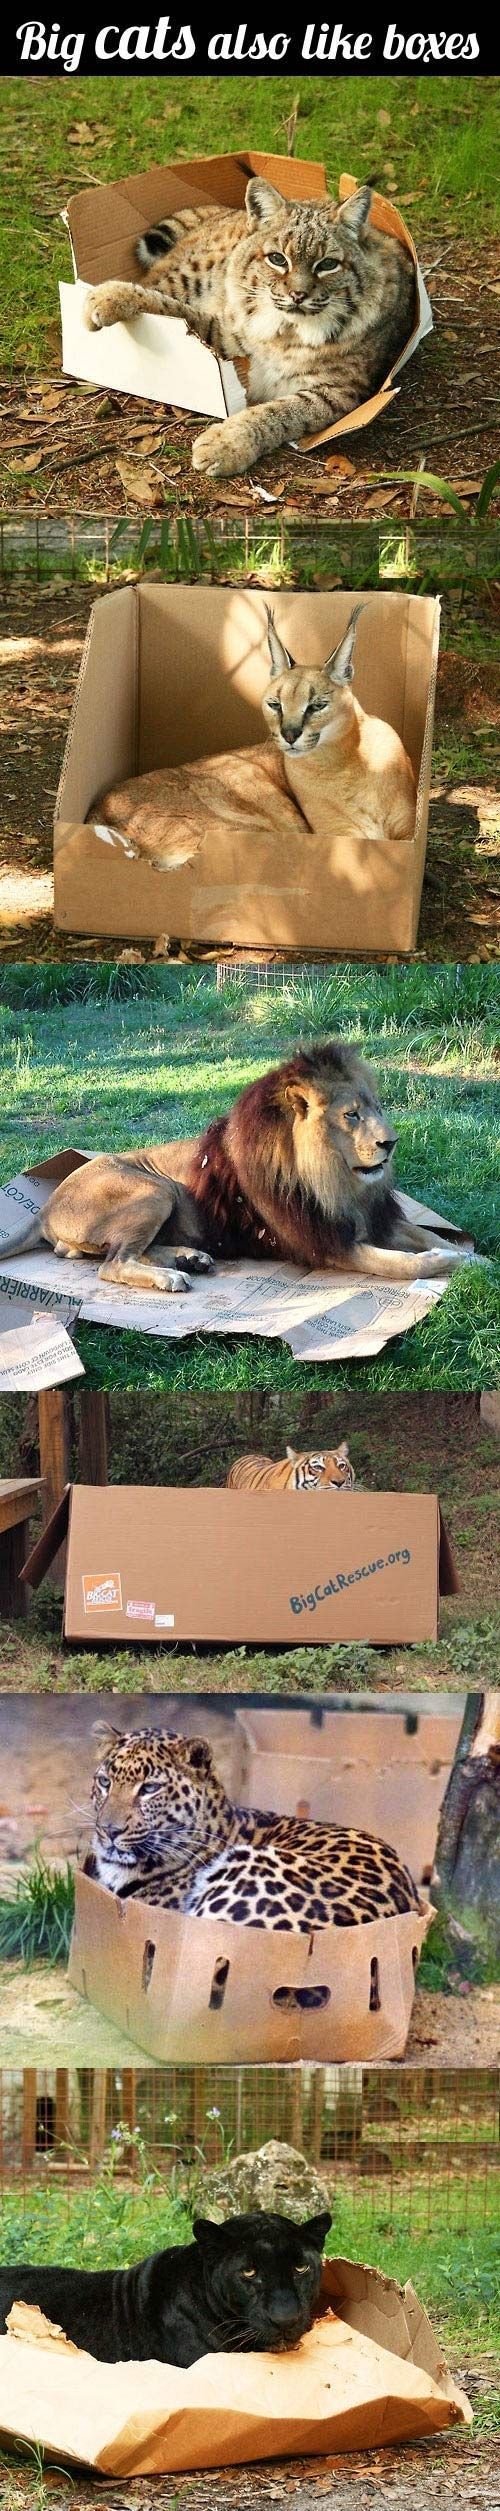 this made me LOL! Big cats also love boxes